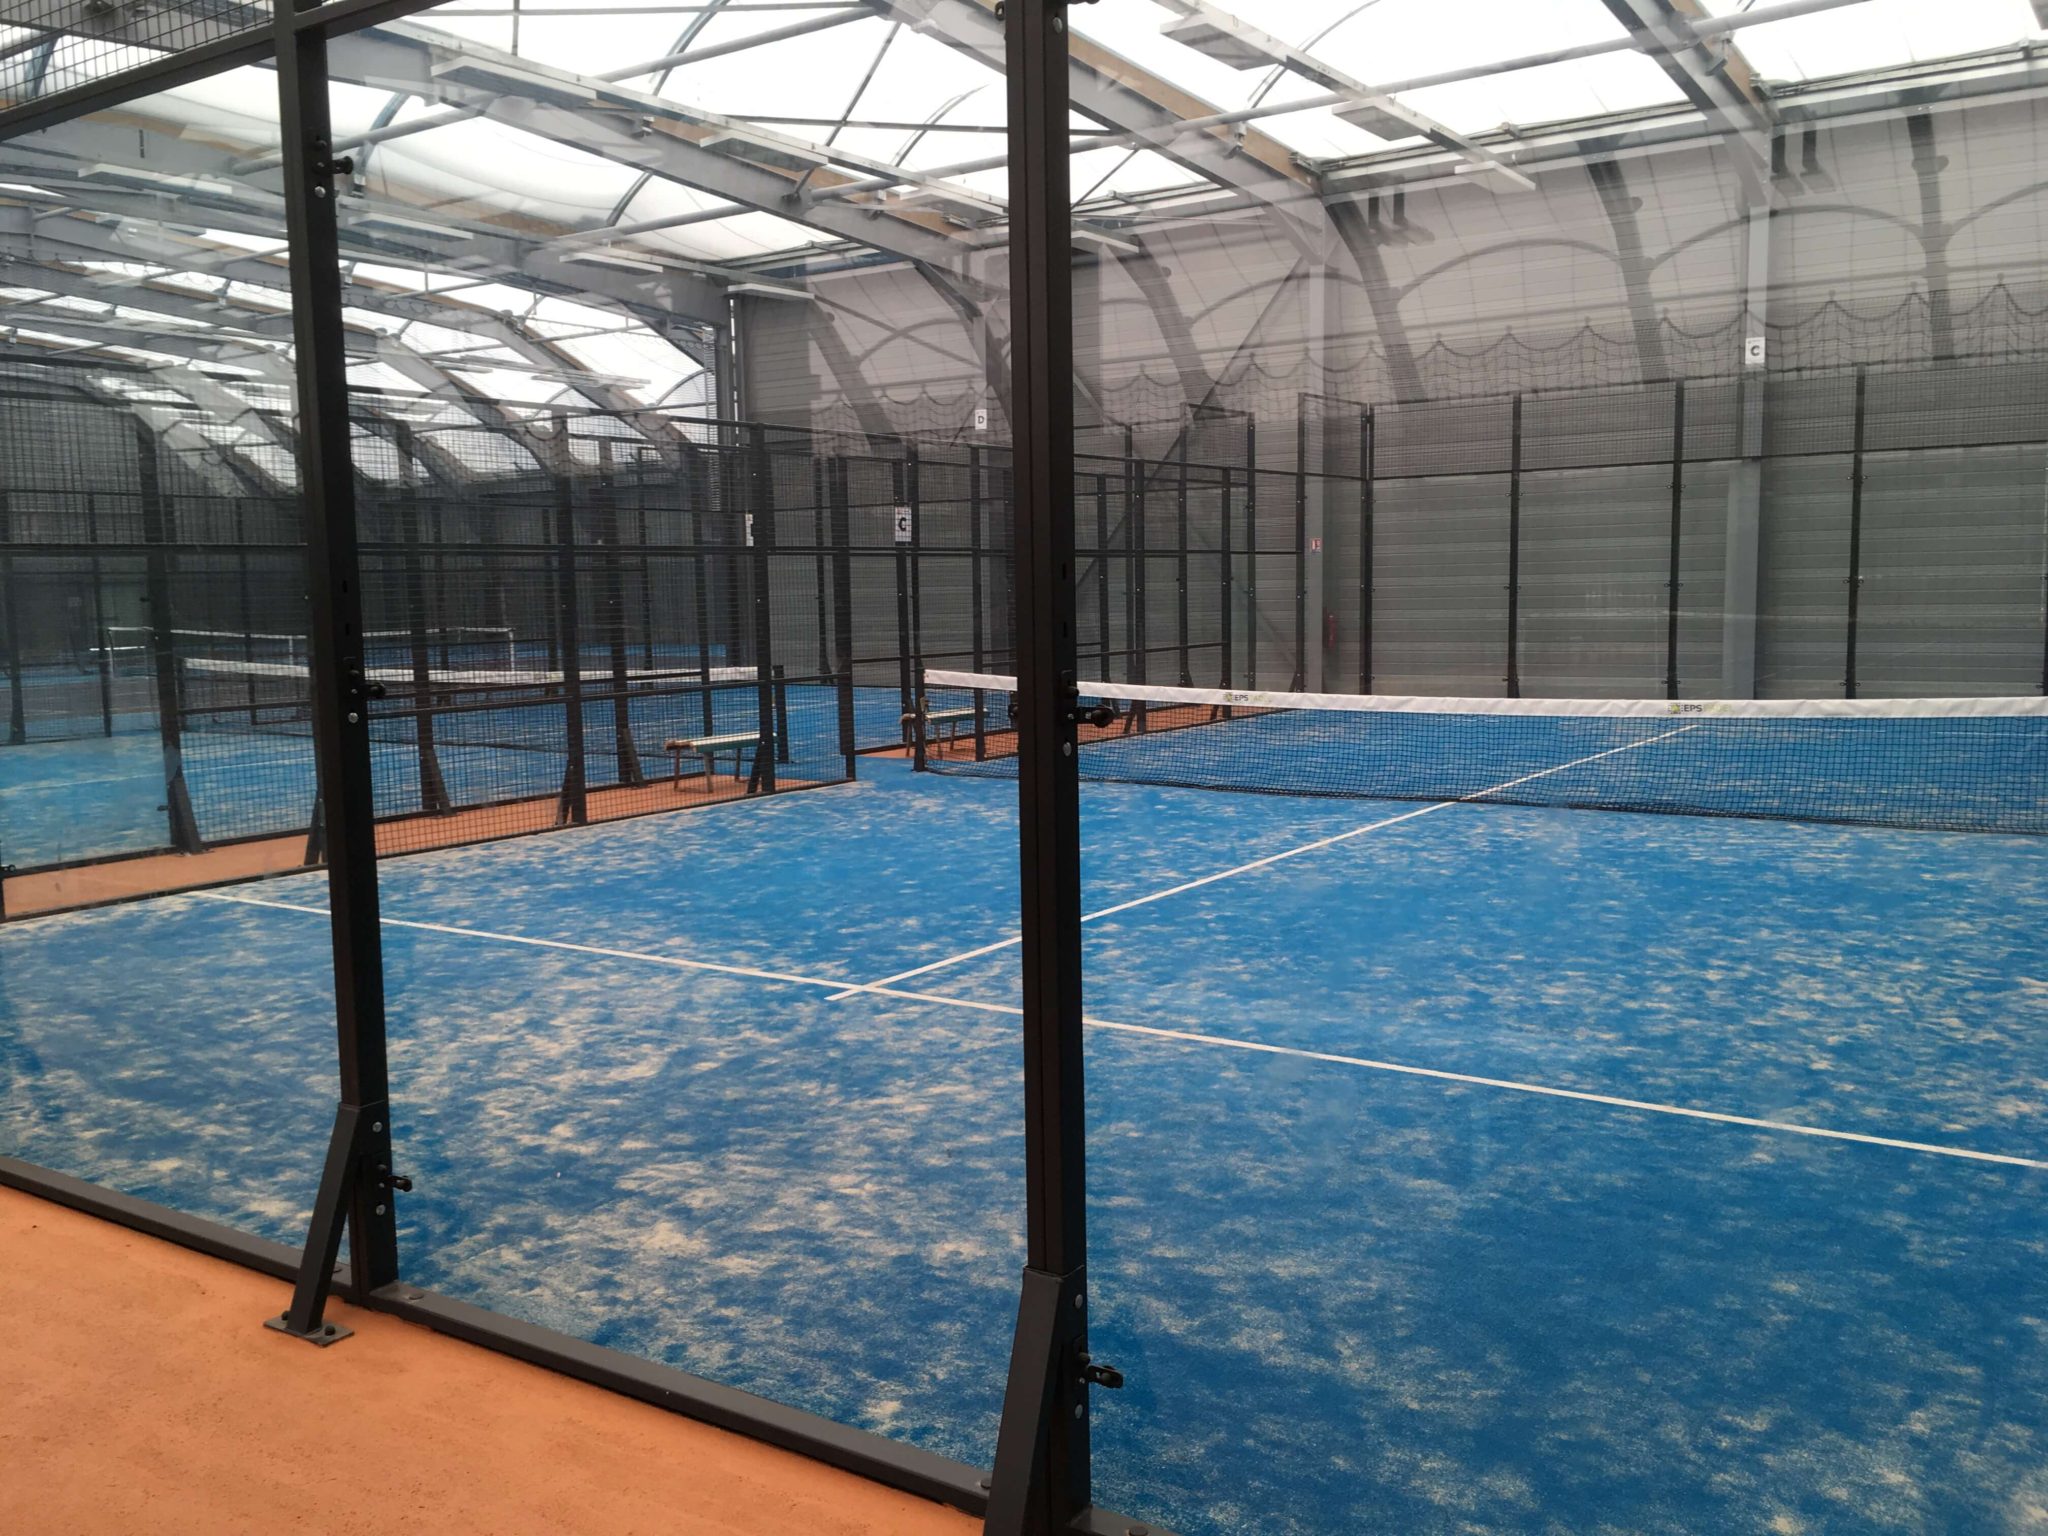 Le padel joins the Angers tennis club